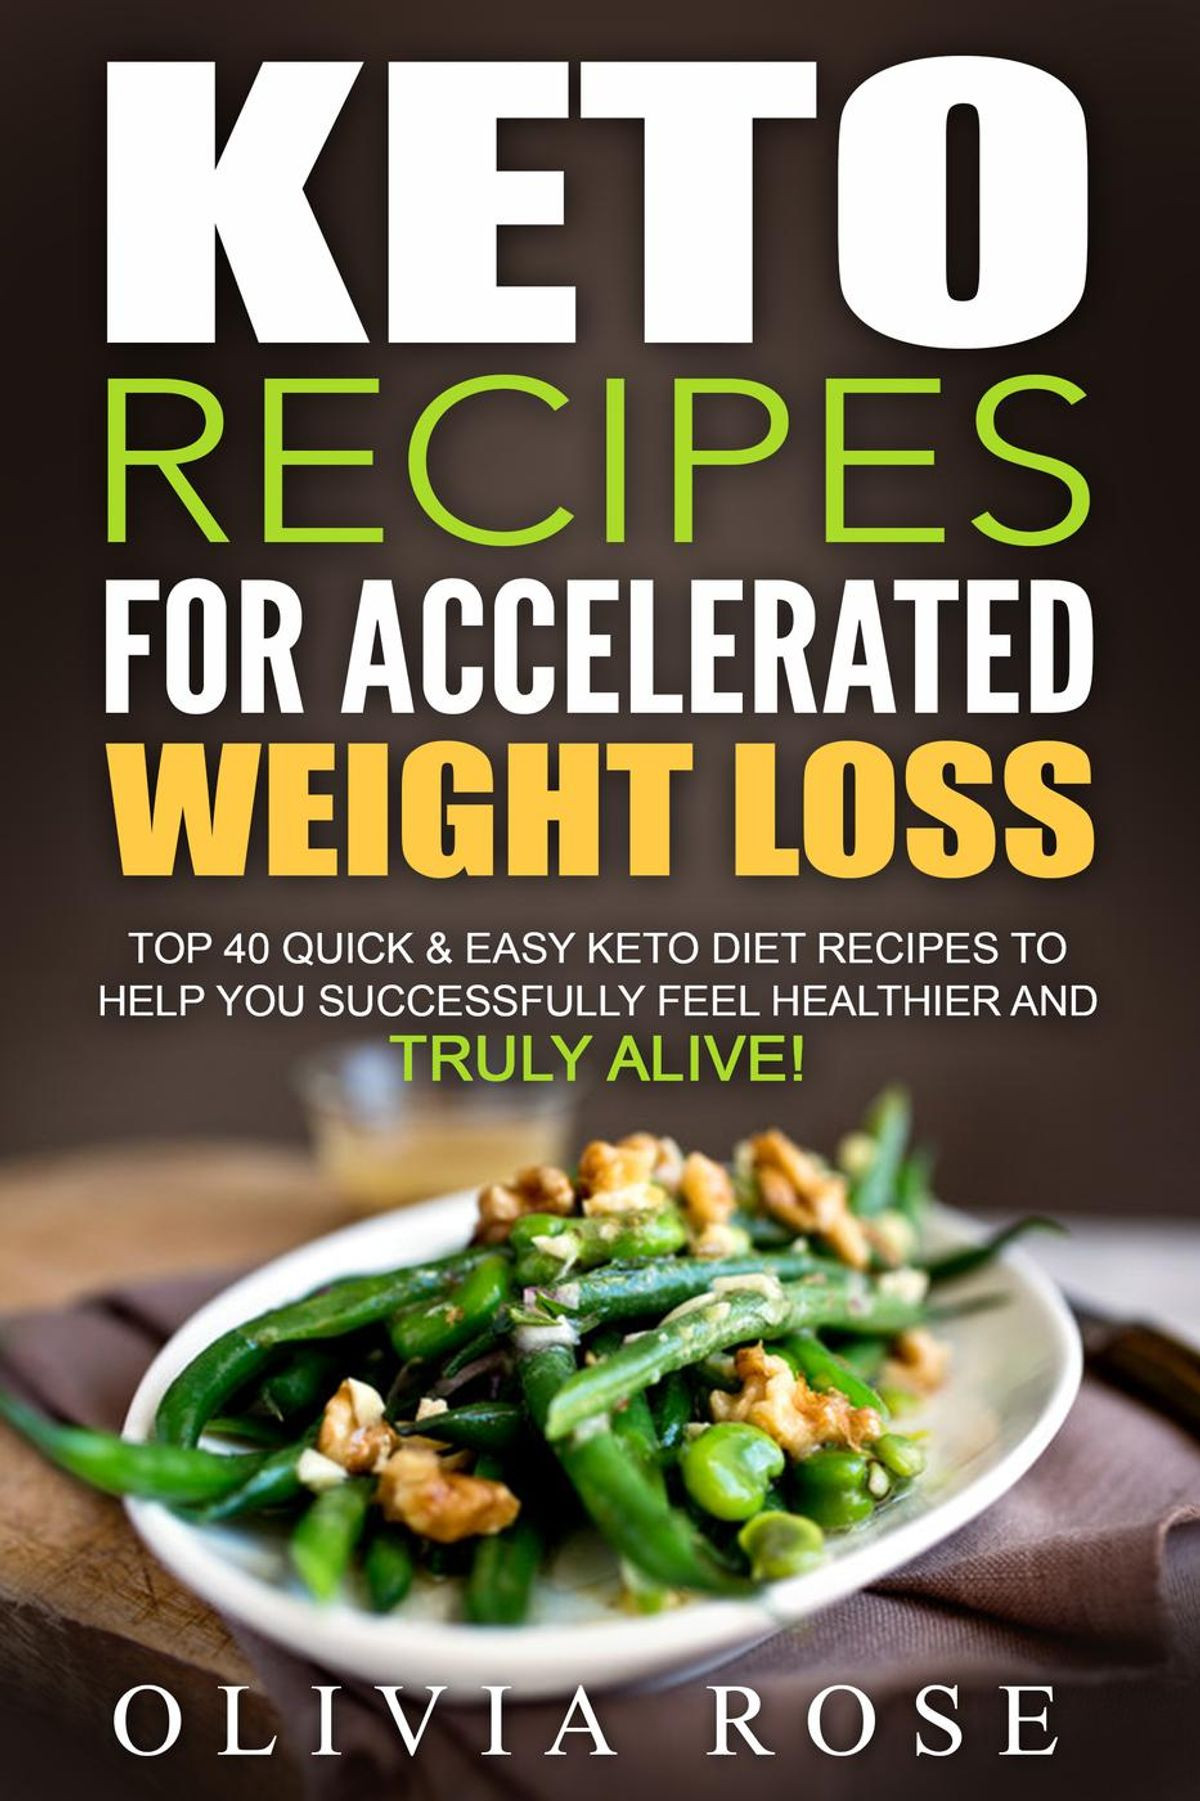 Weight Loss Foods Recipes
 Keto Recipes for Accelerated Weight Loss Top 40 Quick